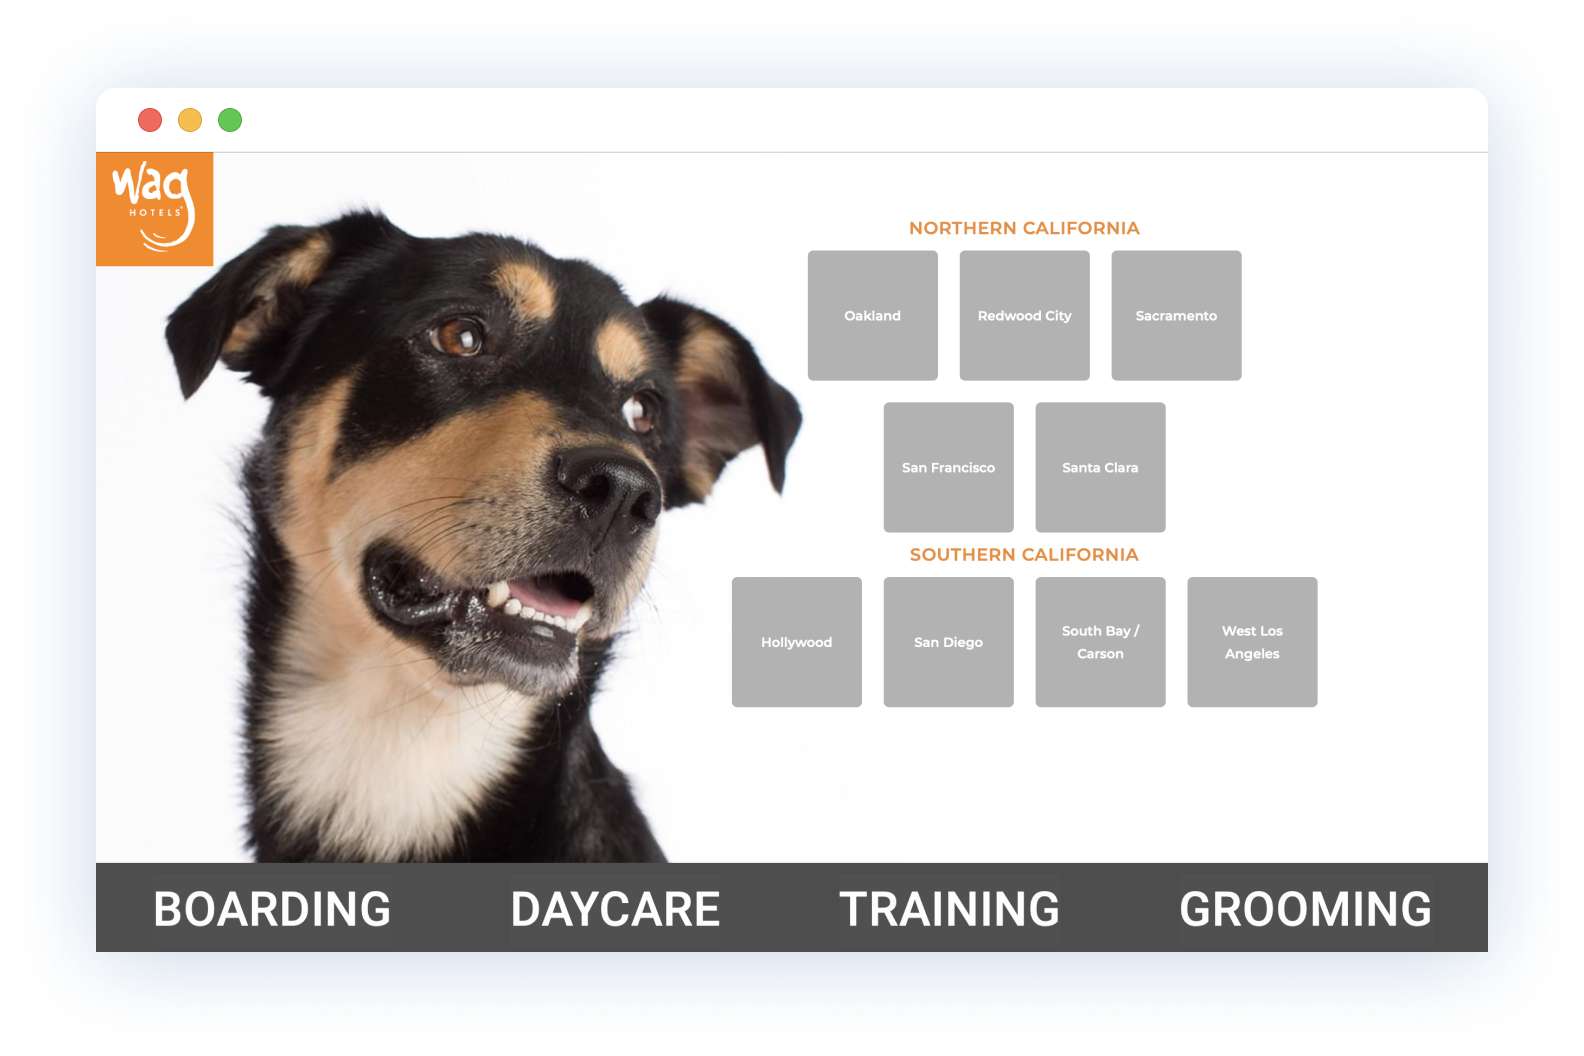 WAG Hotels - example of a page with a picture of a dog and services list: boarding, daycare, training and grooming.